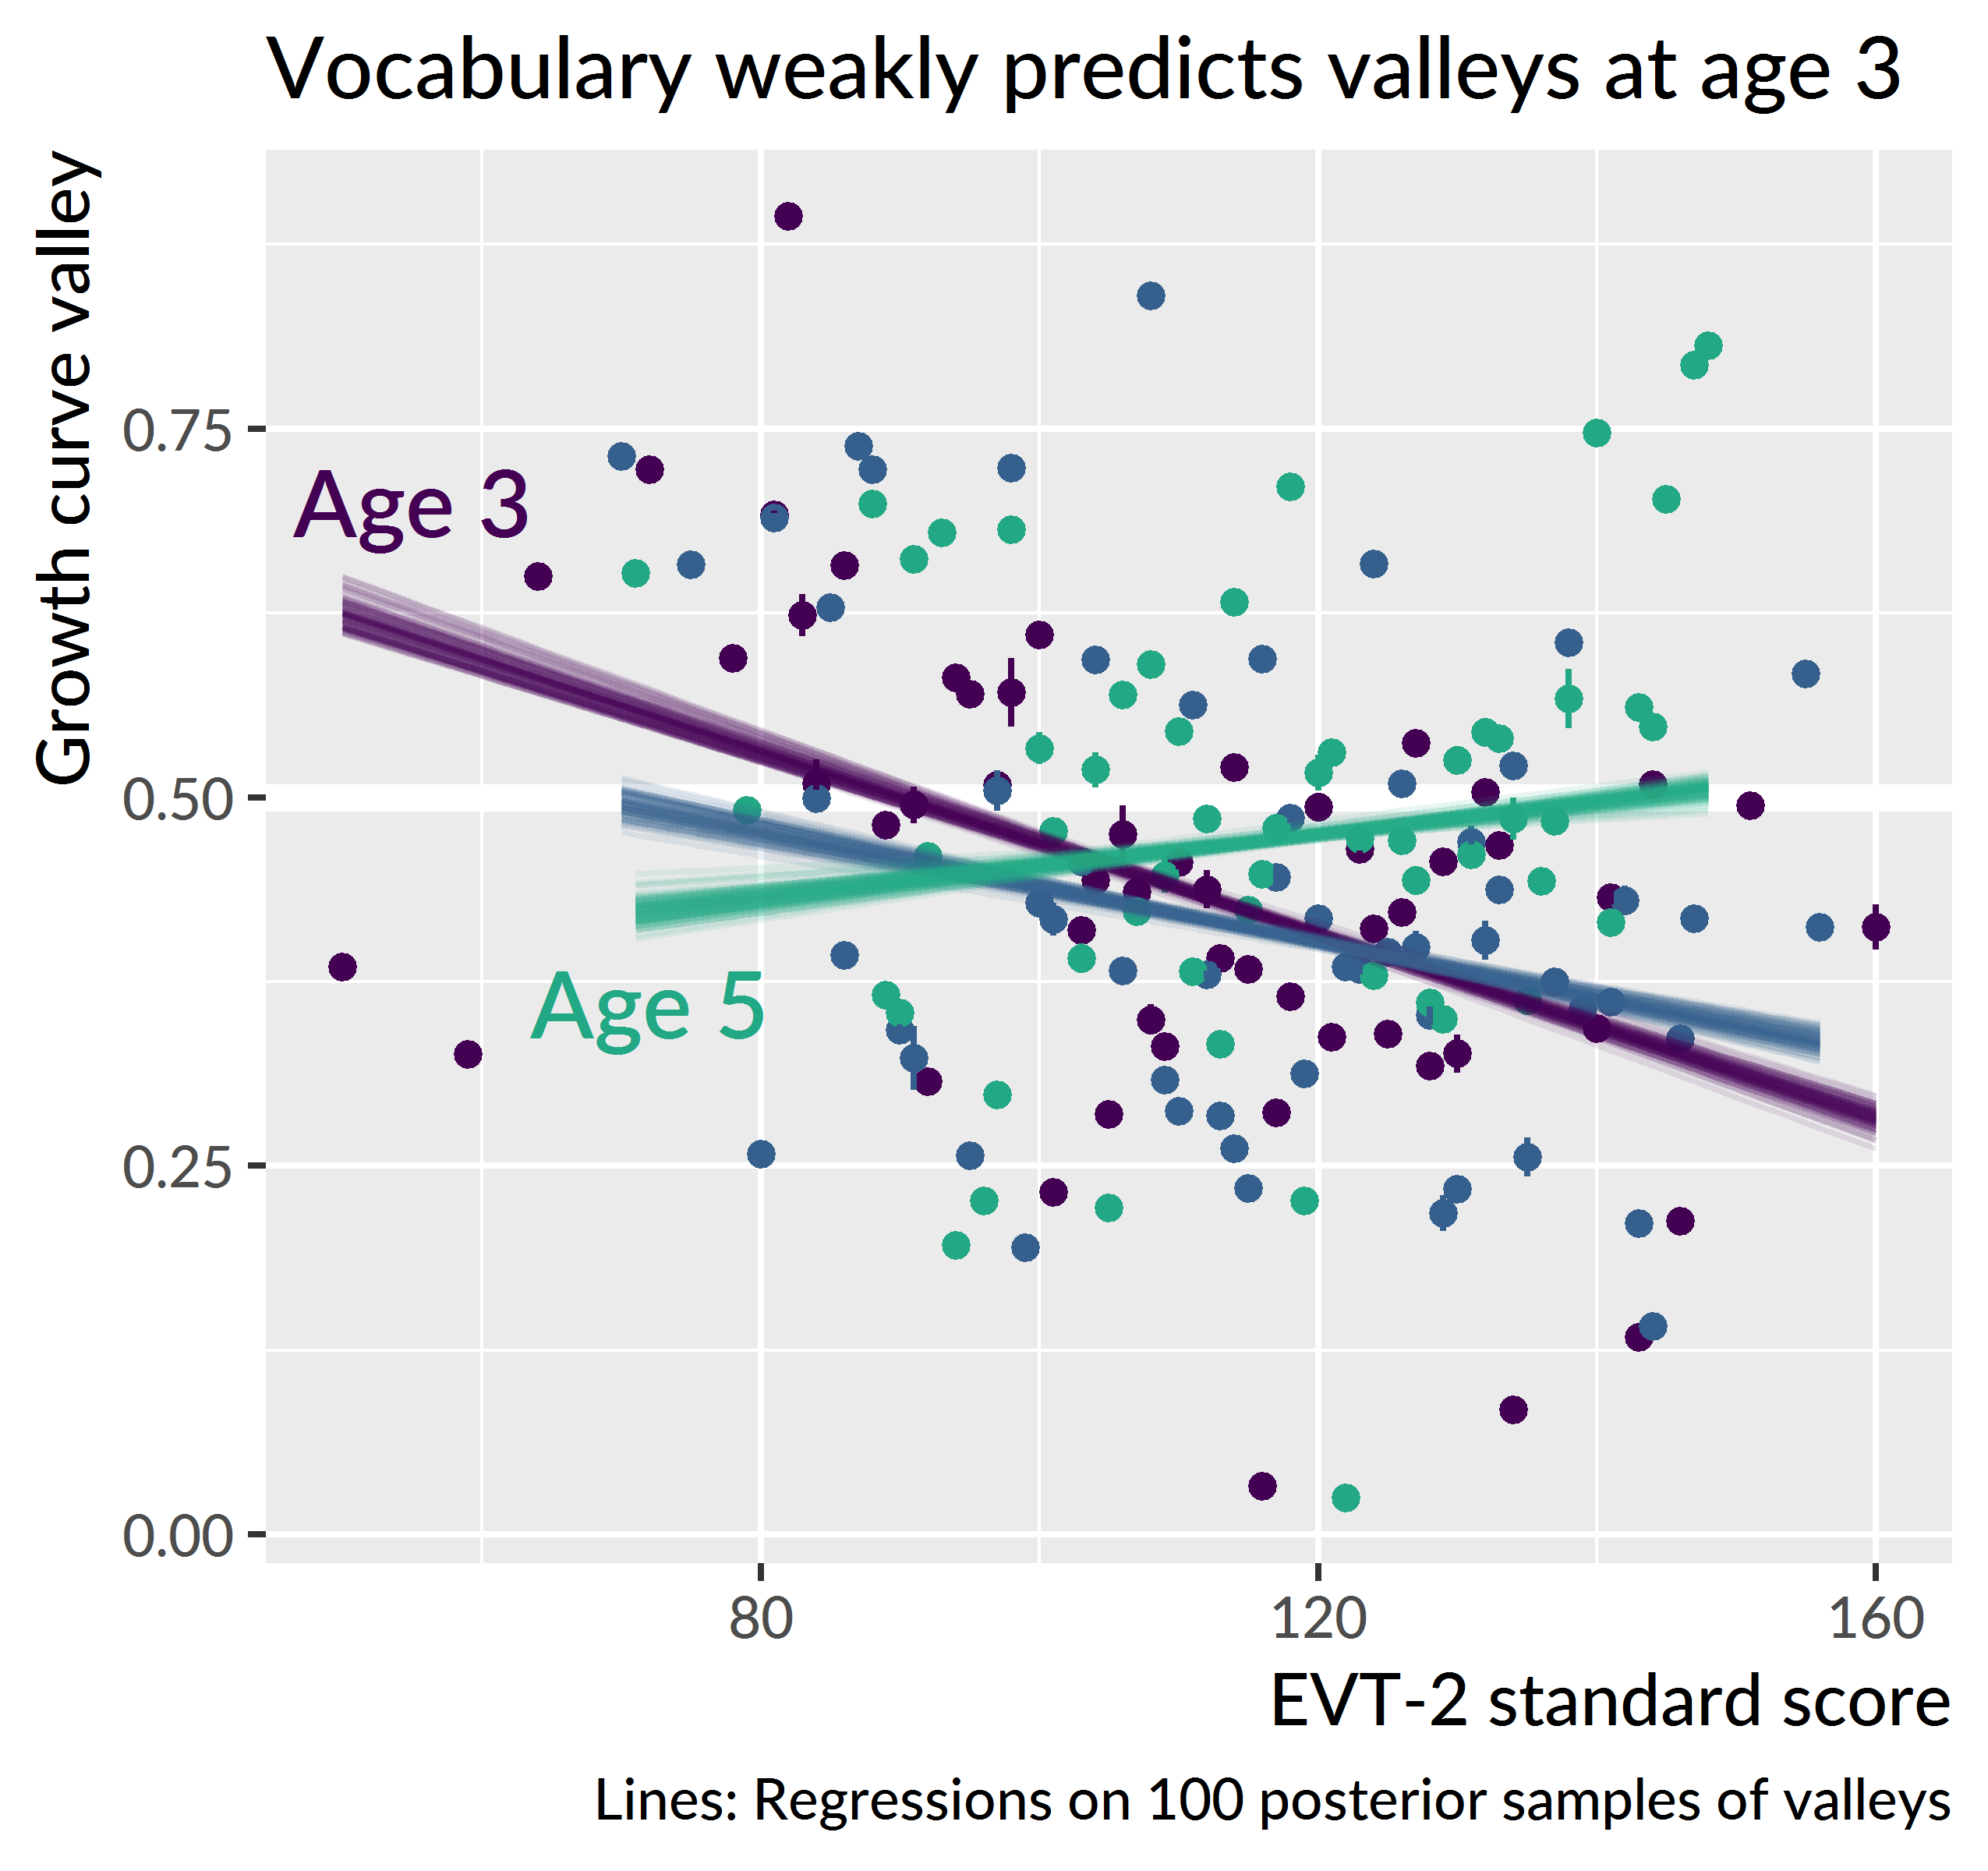 Relationship between expressive vocabulary and growth curve valleys for mispronunciation trials starting on the familiar image.